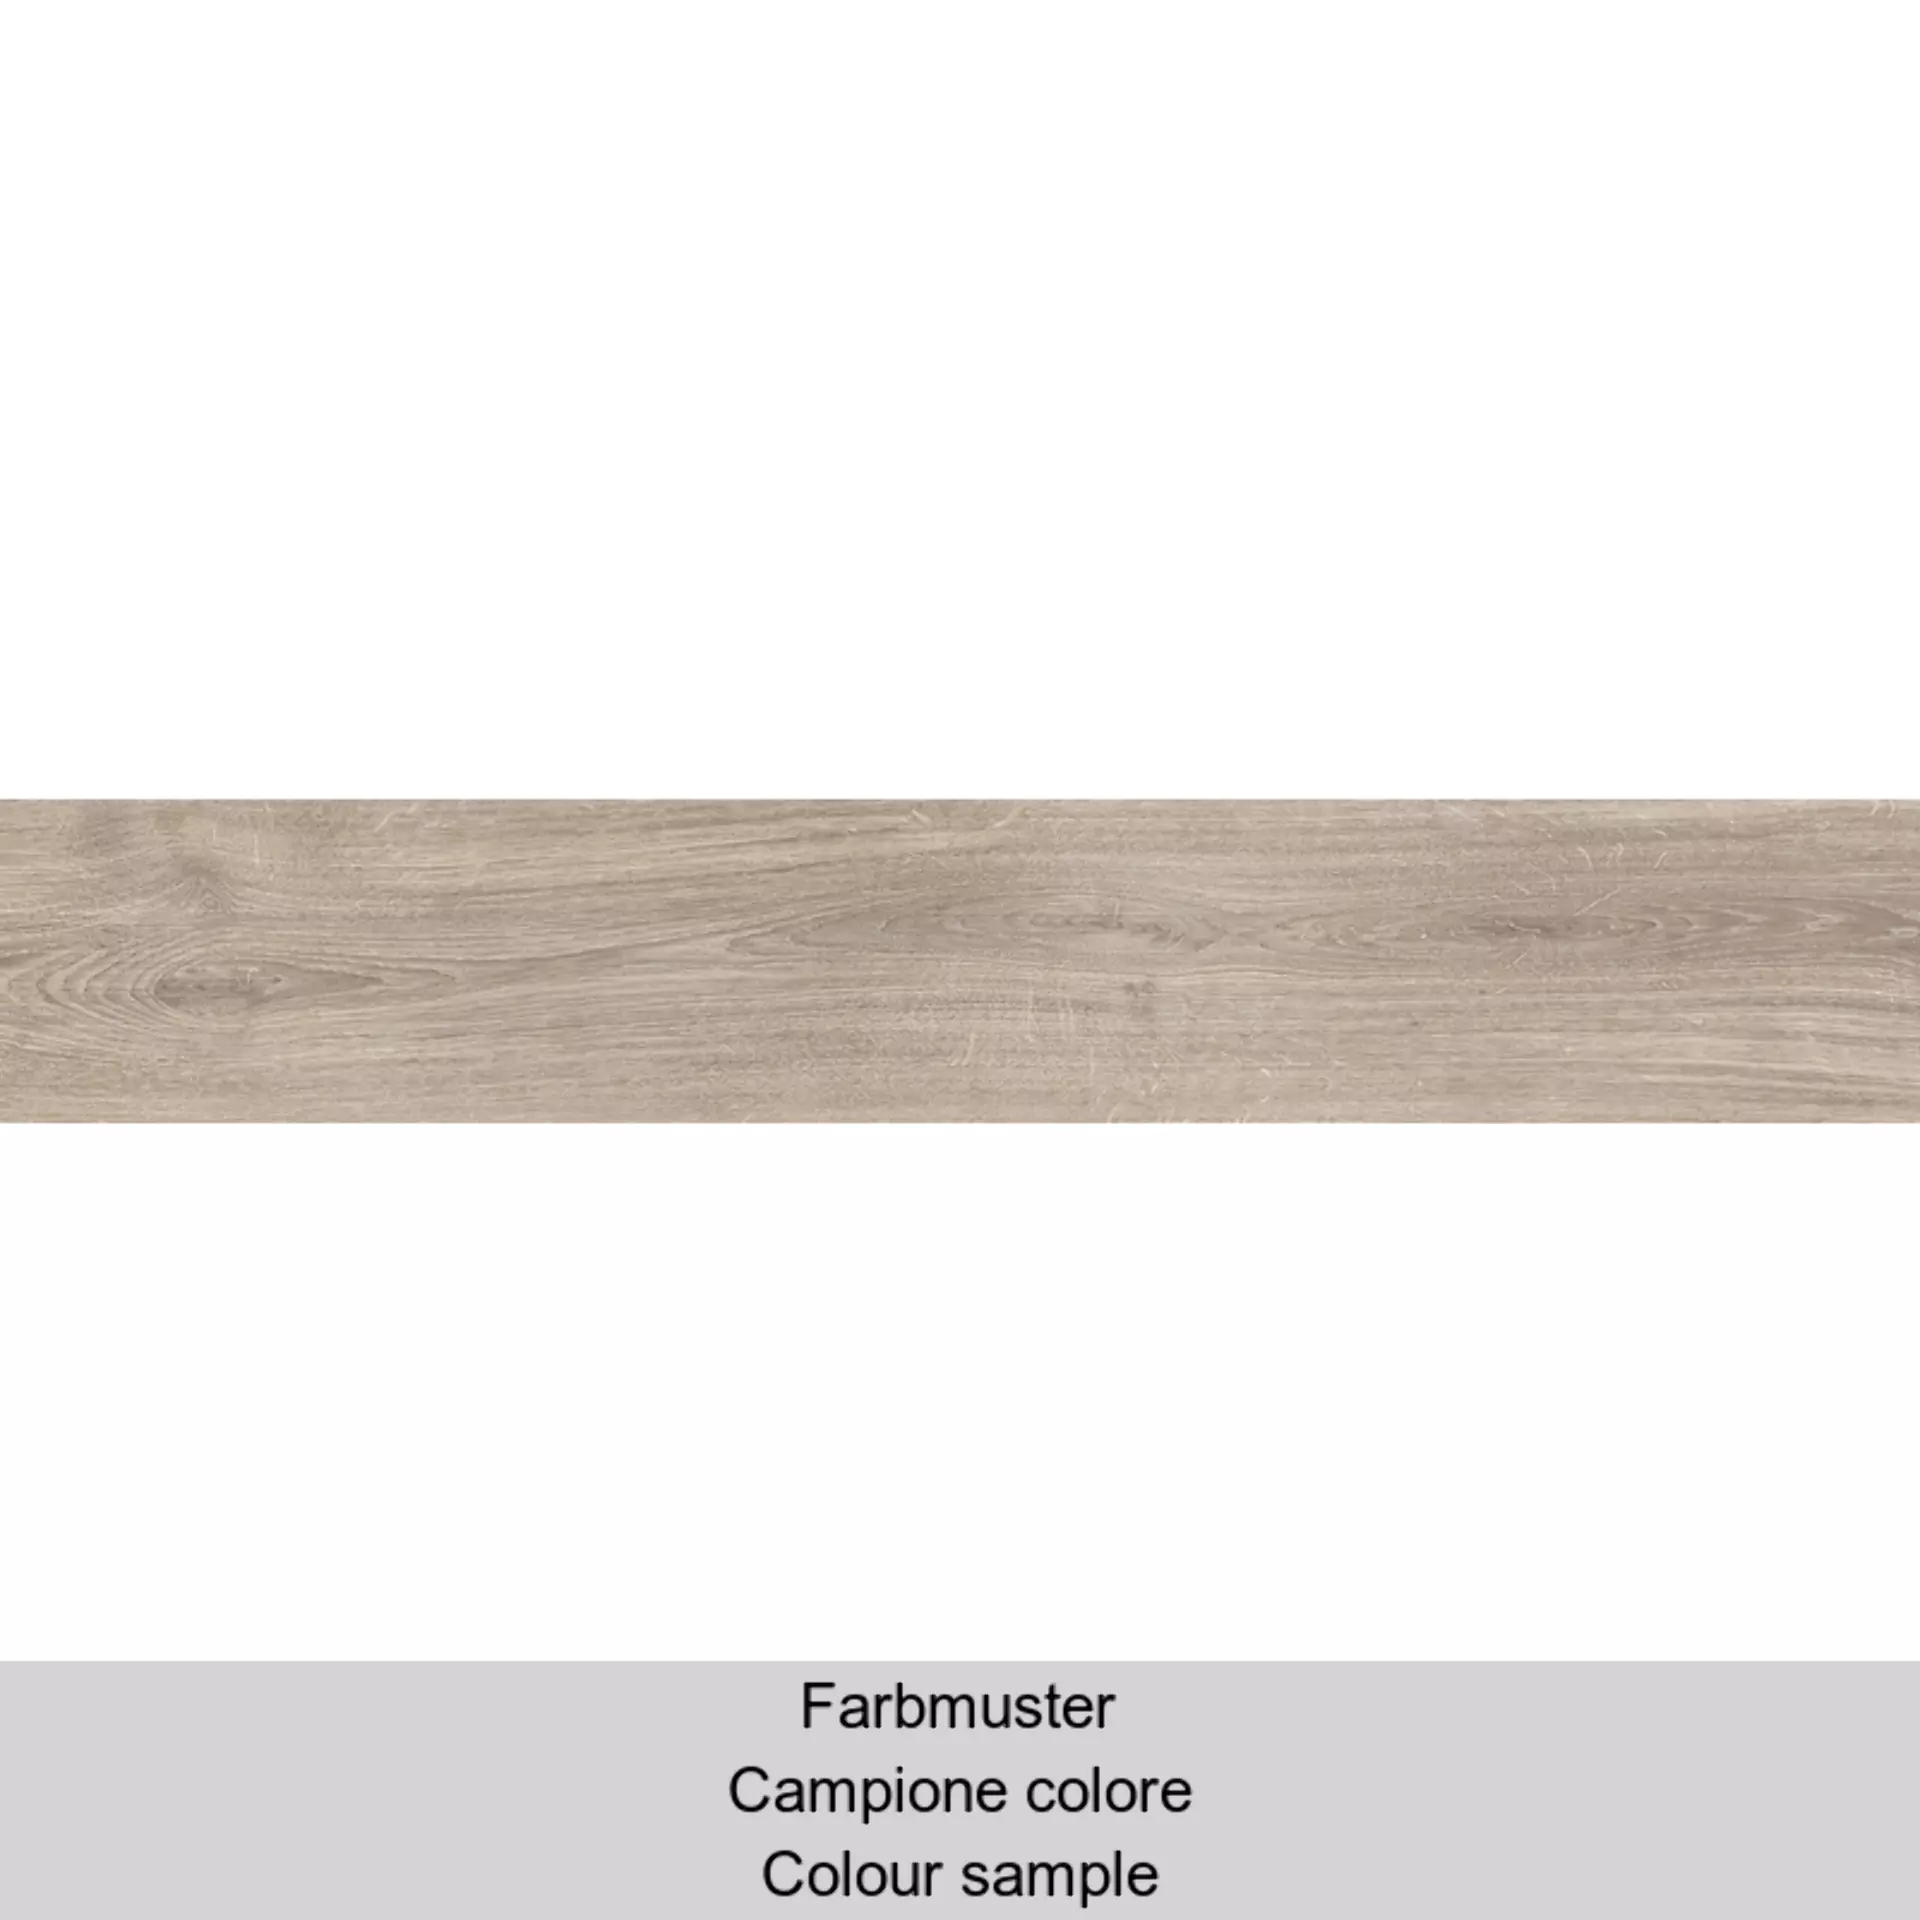 Ergon Woodtouch Corda Naturale E0LX 20x120cm rectified 9,5mm